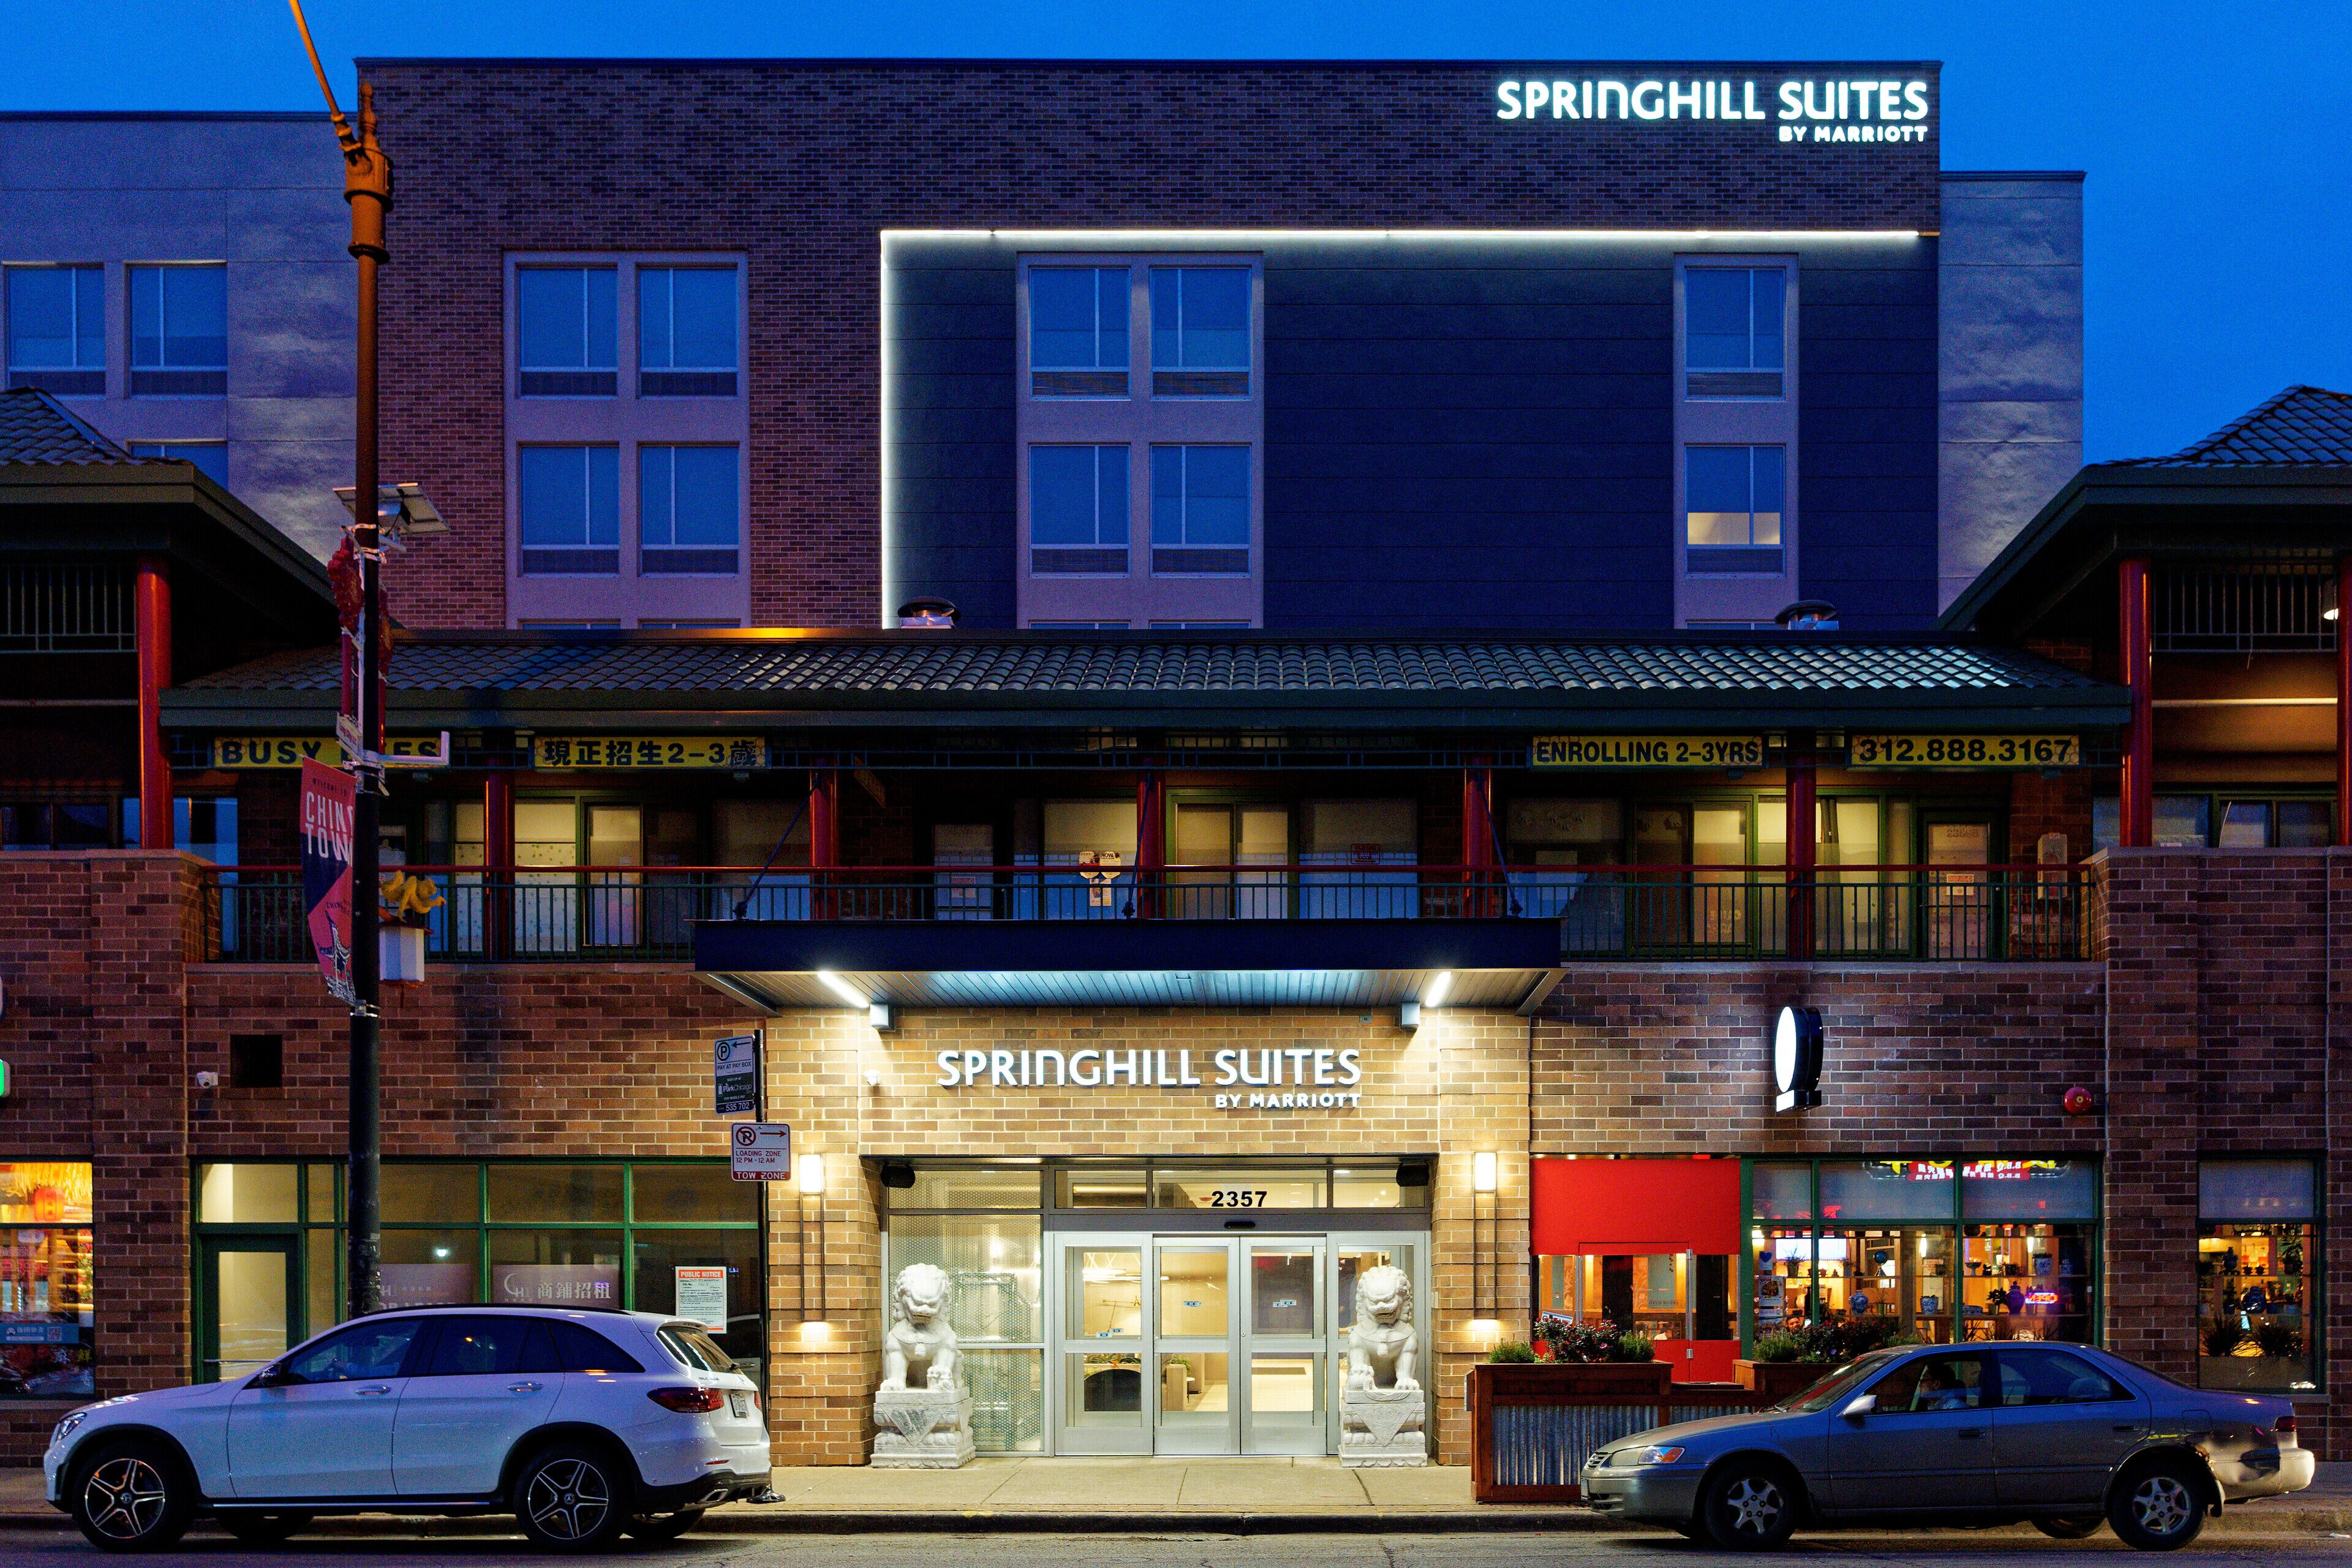 Springhill Suites Chicago Chinatown